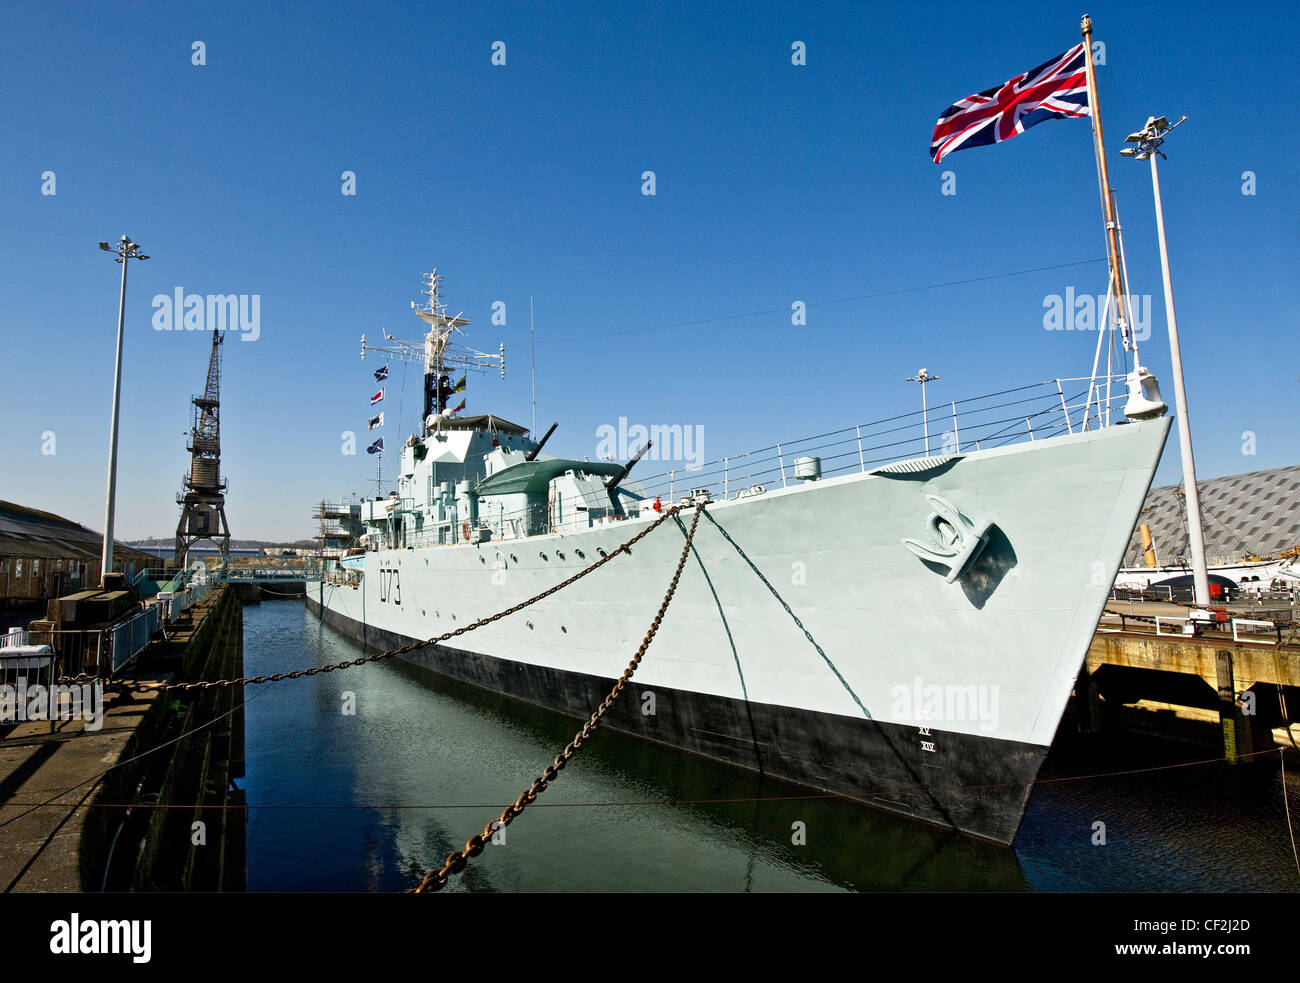 HMS Cavalier (D73), the Royal Navy's last operational Second World War destroyer in her dock at the Historic Dockyard Chatham. Stock Photo